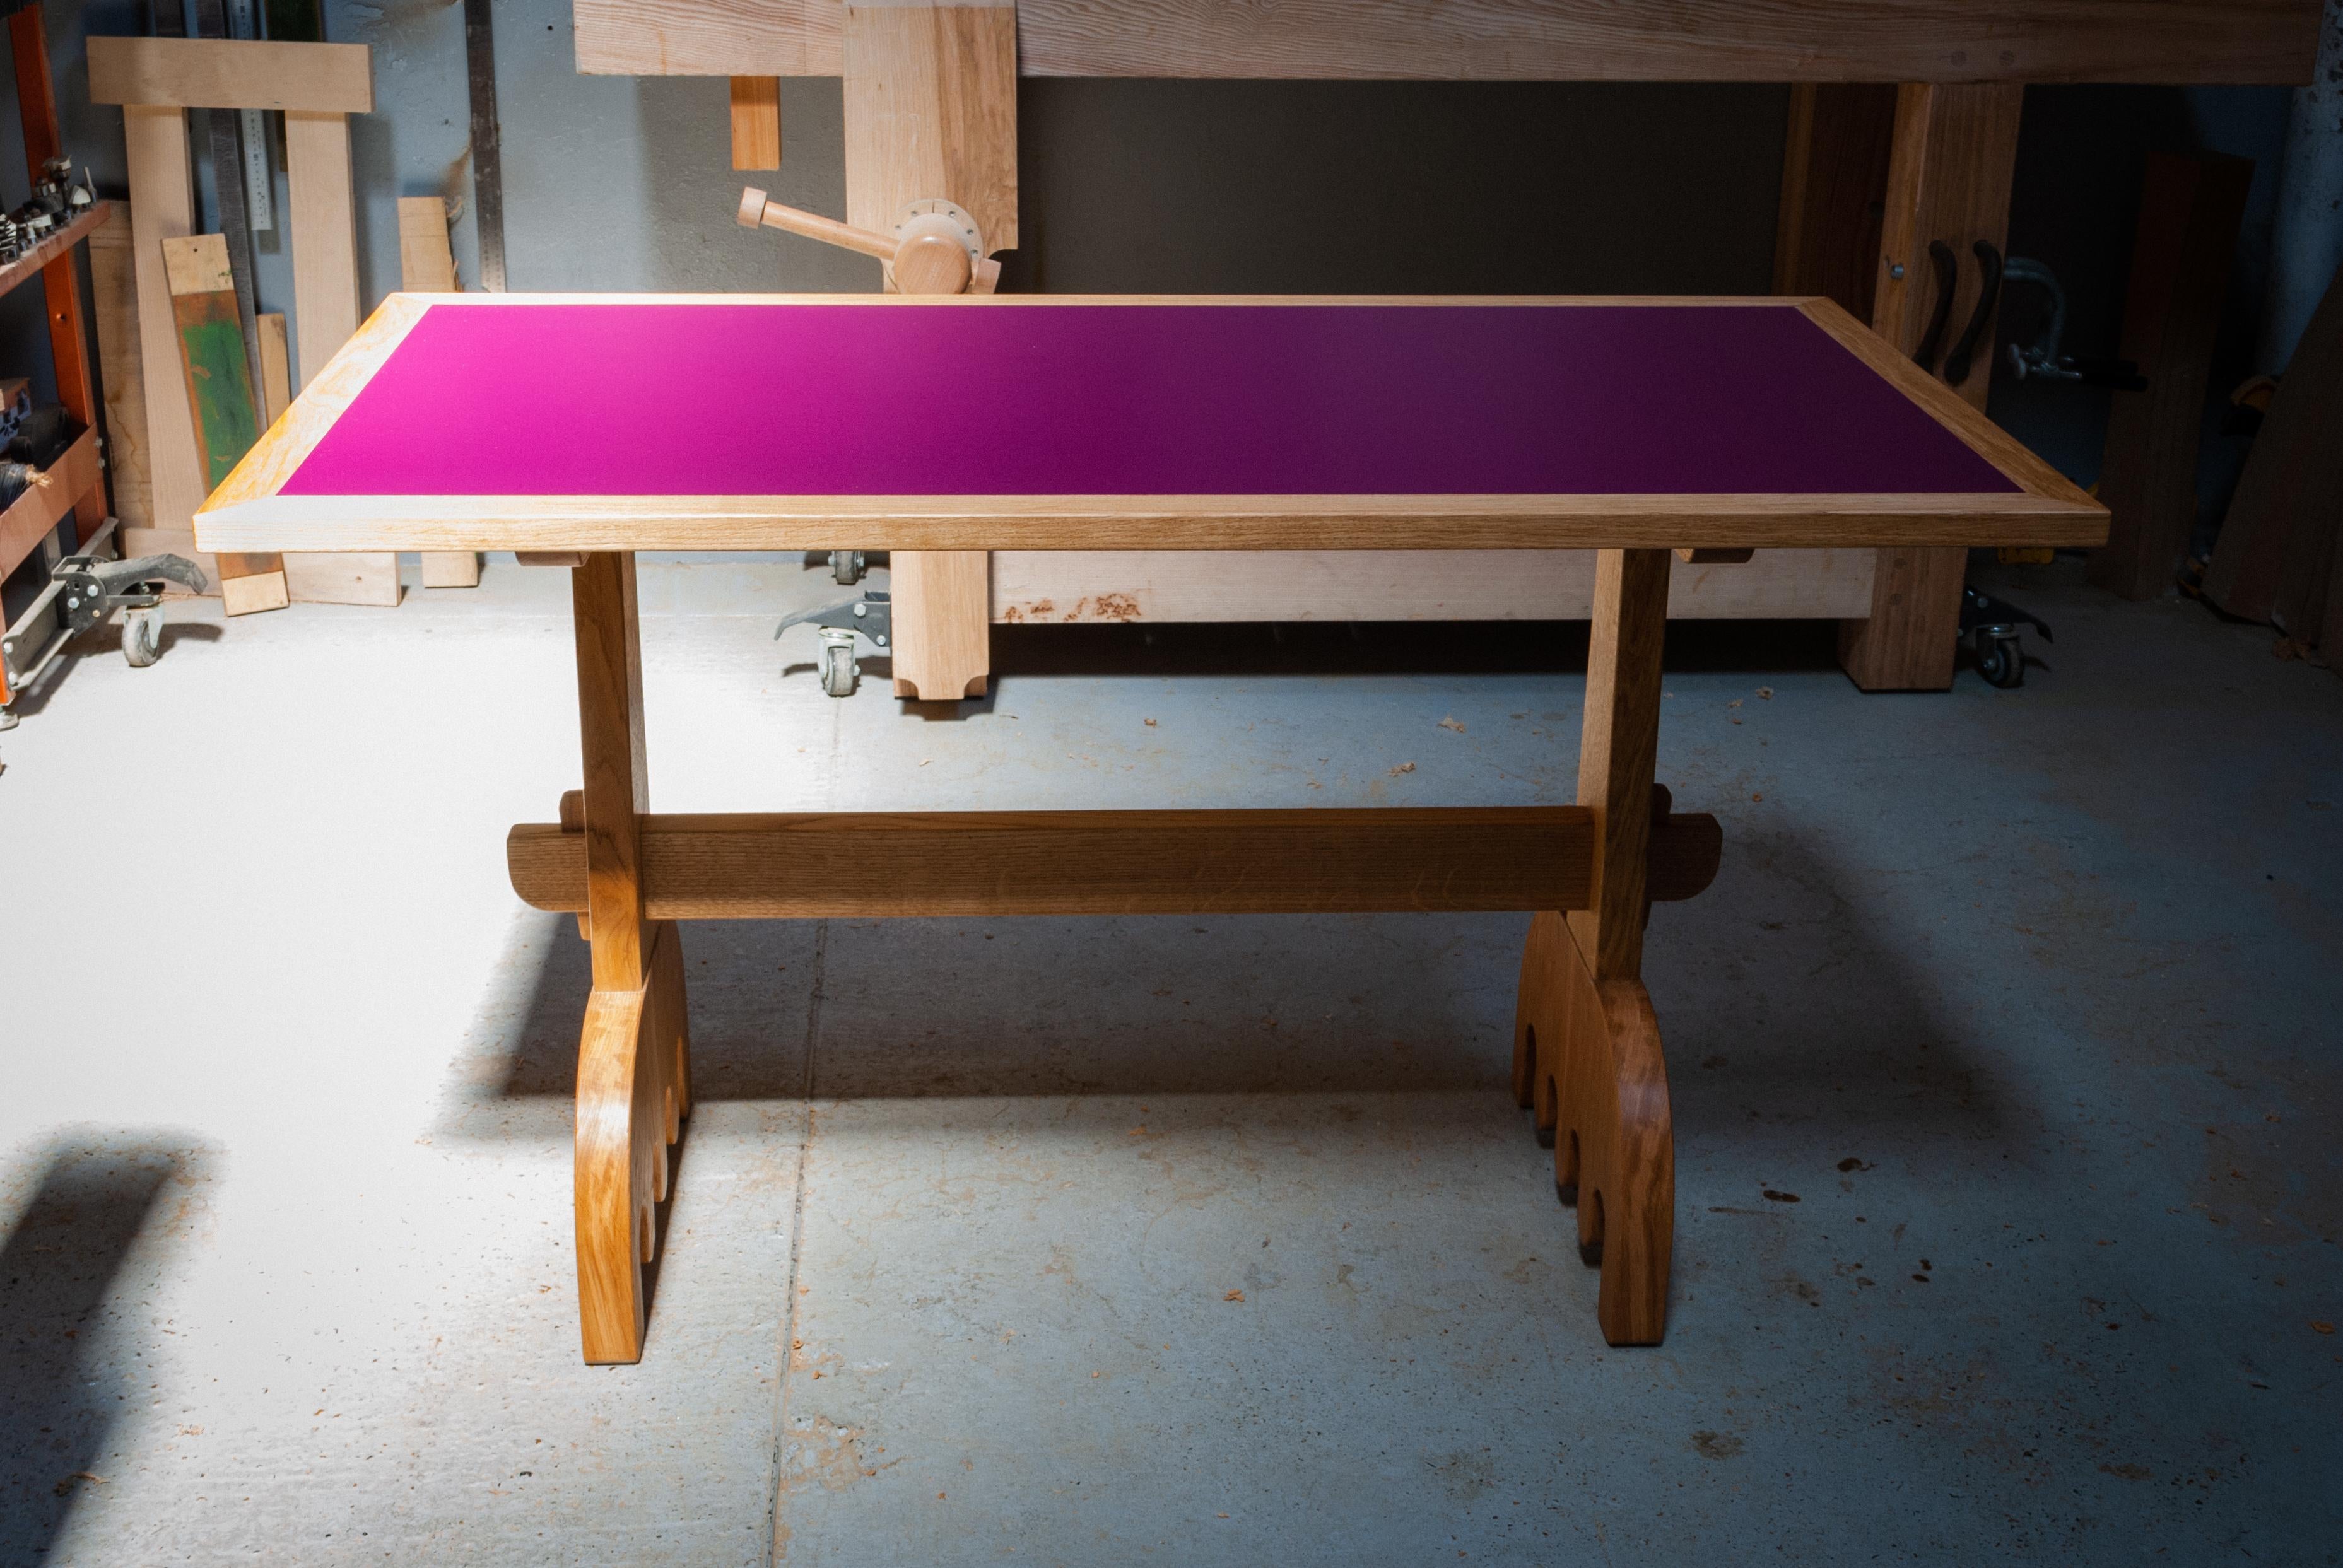 Solid English Oak Dining Table with wedged mortice and tenon joints on the legs and wiggly feet. Based on traditional construction, with a chunkier and playful twist and colourful pink Formica top.

This table is made from solid timber, intelligent